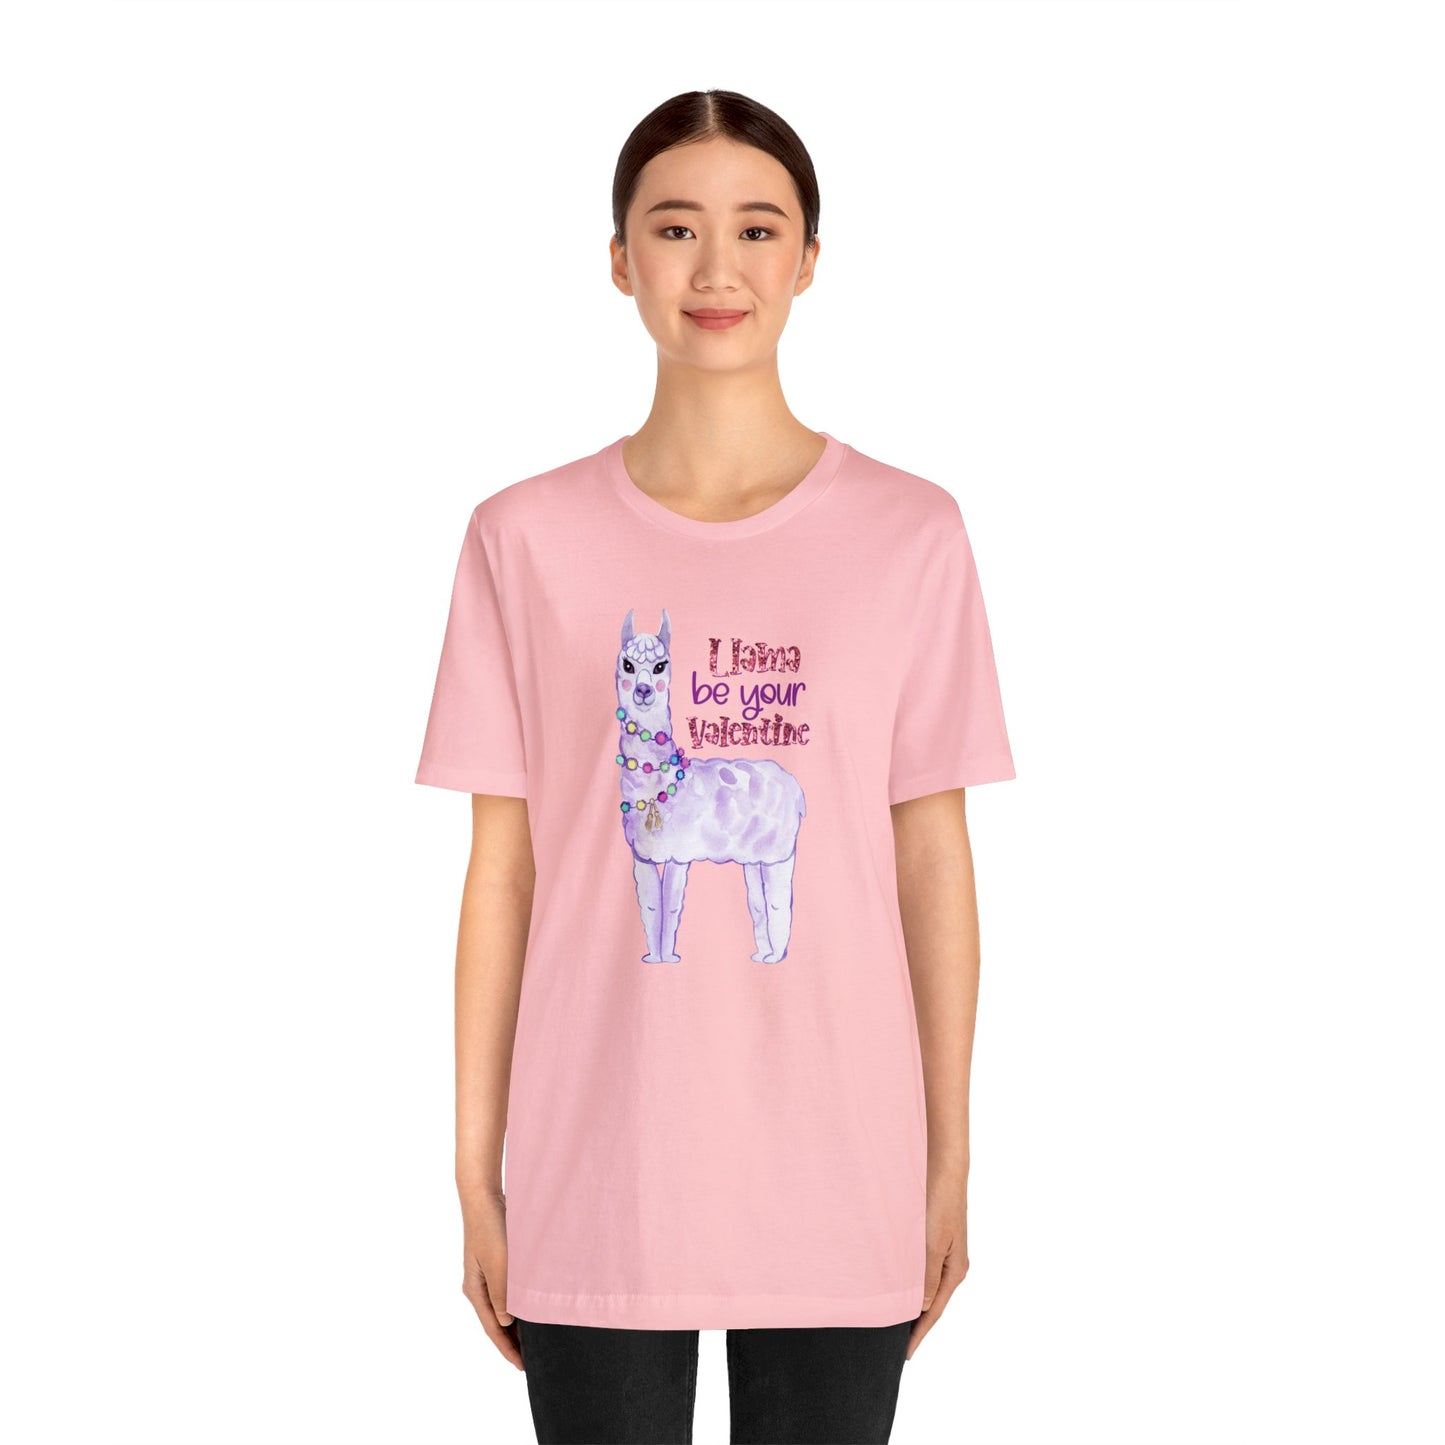 Lama Be Your Valentine Shirt, Bella and Canvas T-shirt